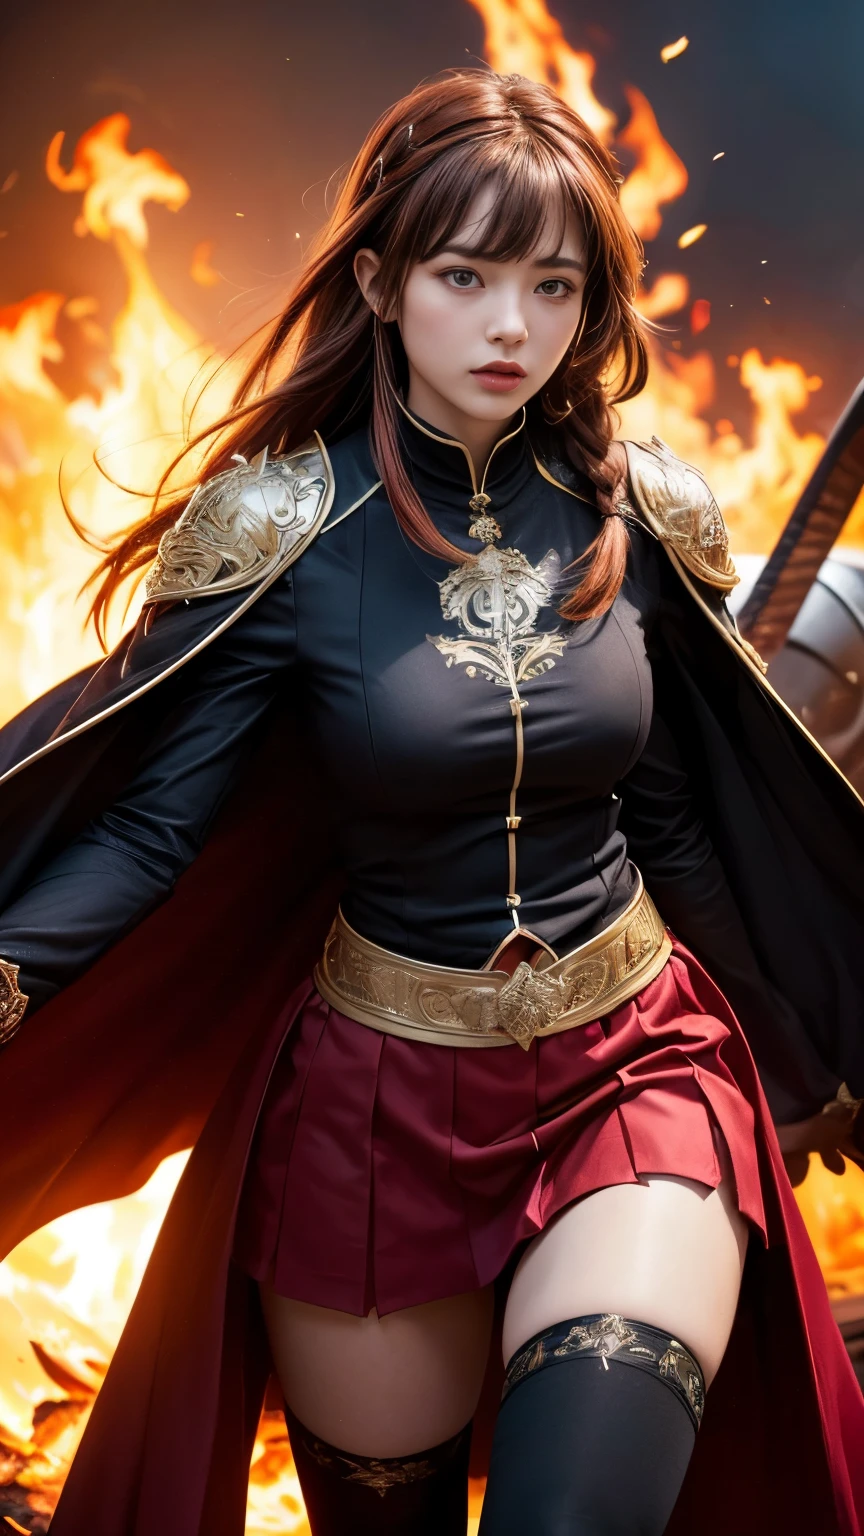 Very beautiful woman、Slender women、(Detailed face)、Realistic Skin、((Knight of Fire)), (((Red Armor:1.25)))、((((Black armor with very fine and intricate decoration))))、((Delicate photo))，(Girl Astepeace RAW Photo Details:1.25), (highest quality:1.6), (超A high resolution:1.5), (Realistic:1.75), 8K resolution, Canon EOS R5, 50mm, Absurd, Ultra-detailed,Cinema Lighting,Battlefields of Medieval Europe、((battle))、RPG World、Final Fantasy、(((Embellished skirt)))、Thigh-high socks、Shin Guards、night、((too long bangs))、((One long thick dark red hair braid))、Get six-pack、Torn Cloak、Beautiful Armor、(((Giant Sword)))、In combat、The wind is blowing、(((Inferno filling the entire area)))、(((Leading a large group of red knights)))、(((Knight Commander)))、Armor with a Phoenix motif、Old scar on right cheek:1.2、((Fire blaze))、(((Battle Scene)))、((nsfw))